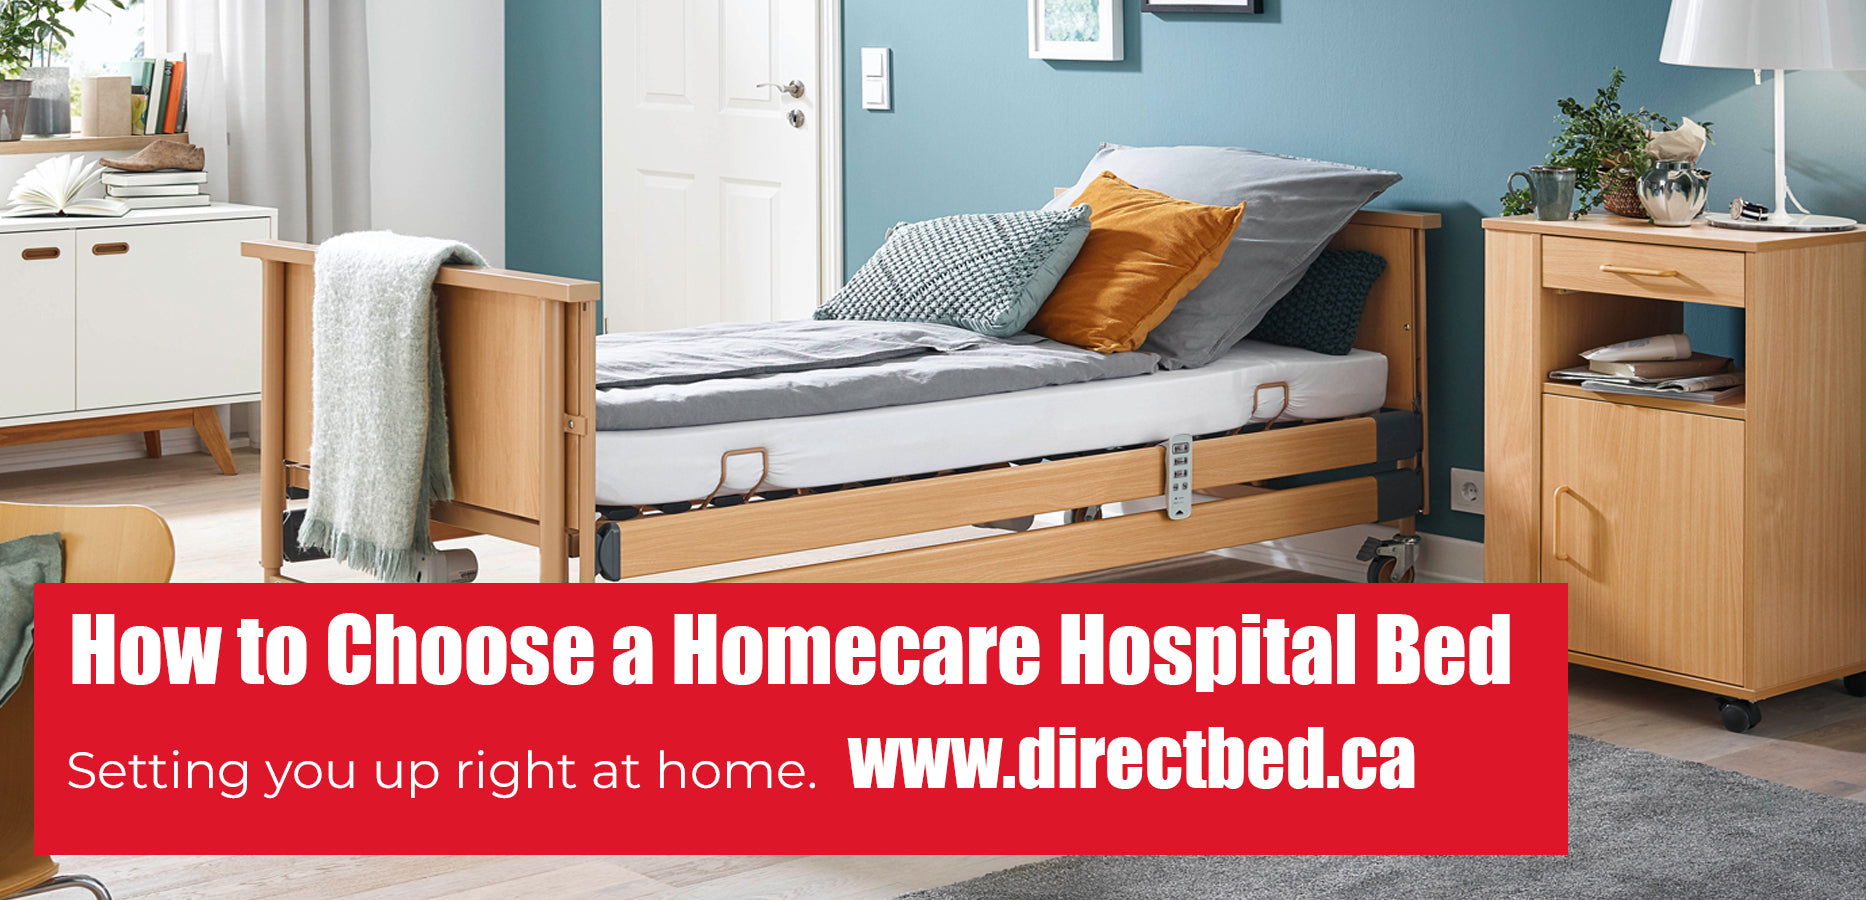 How Do You Choose A Hospital Bed For Your Home?